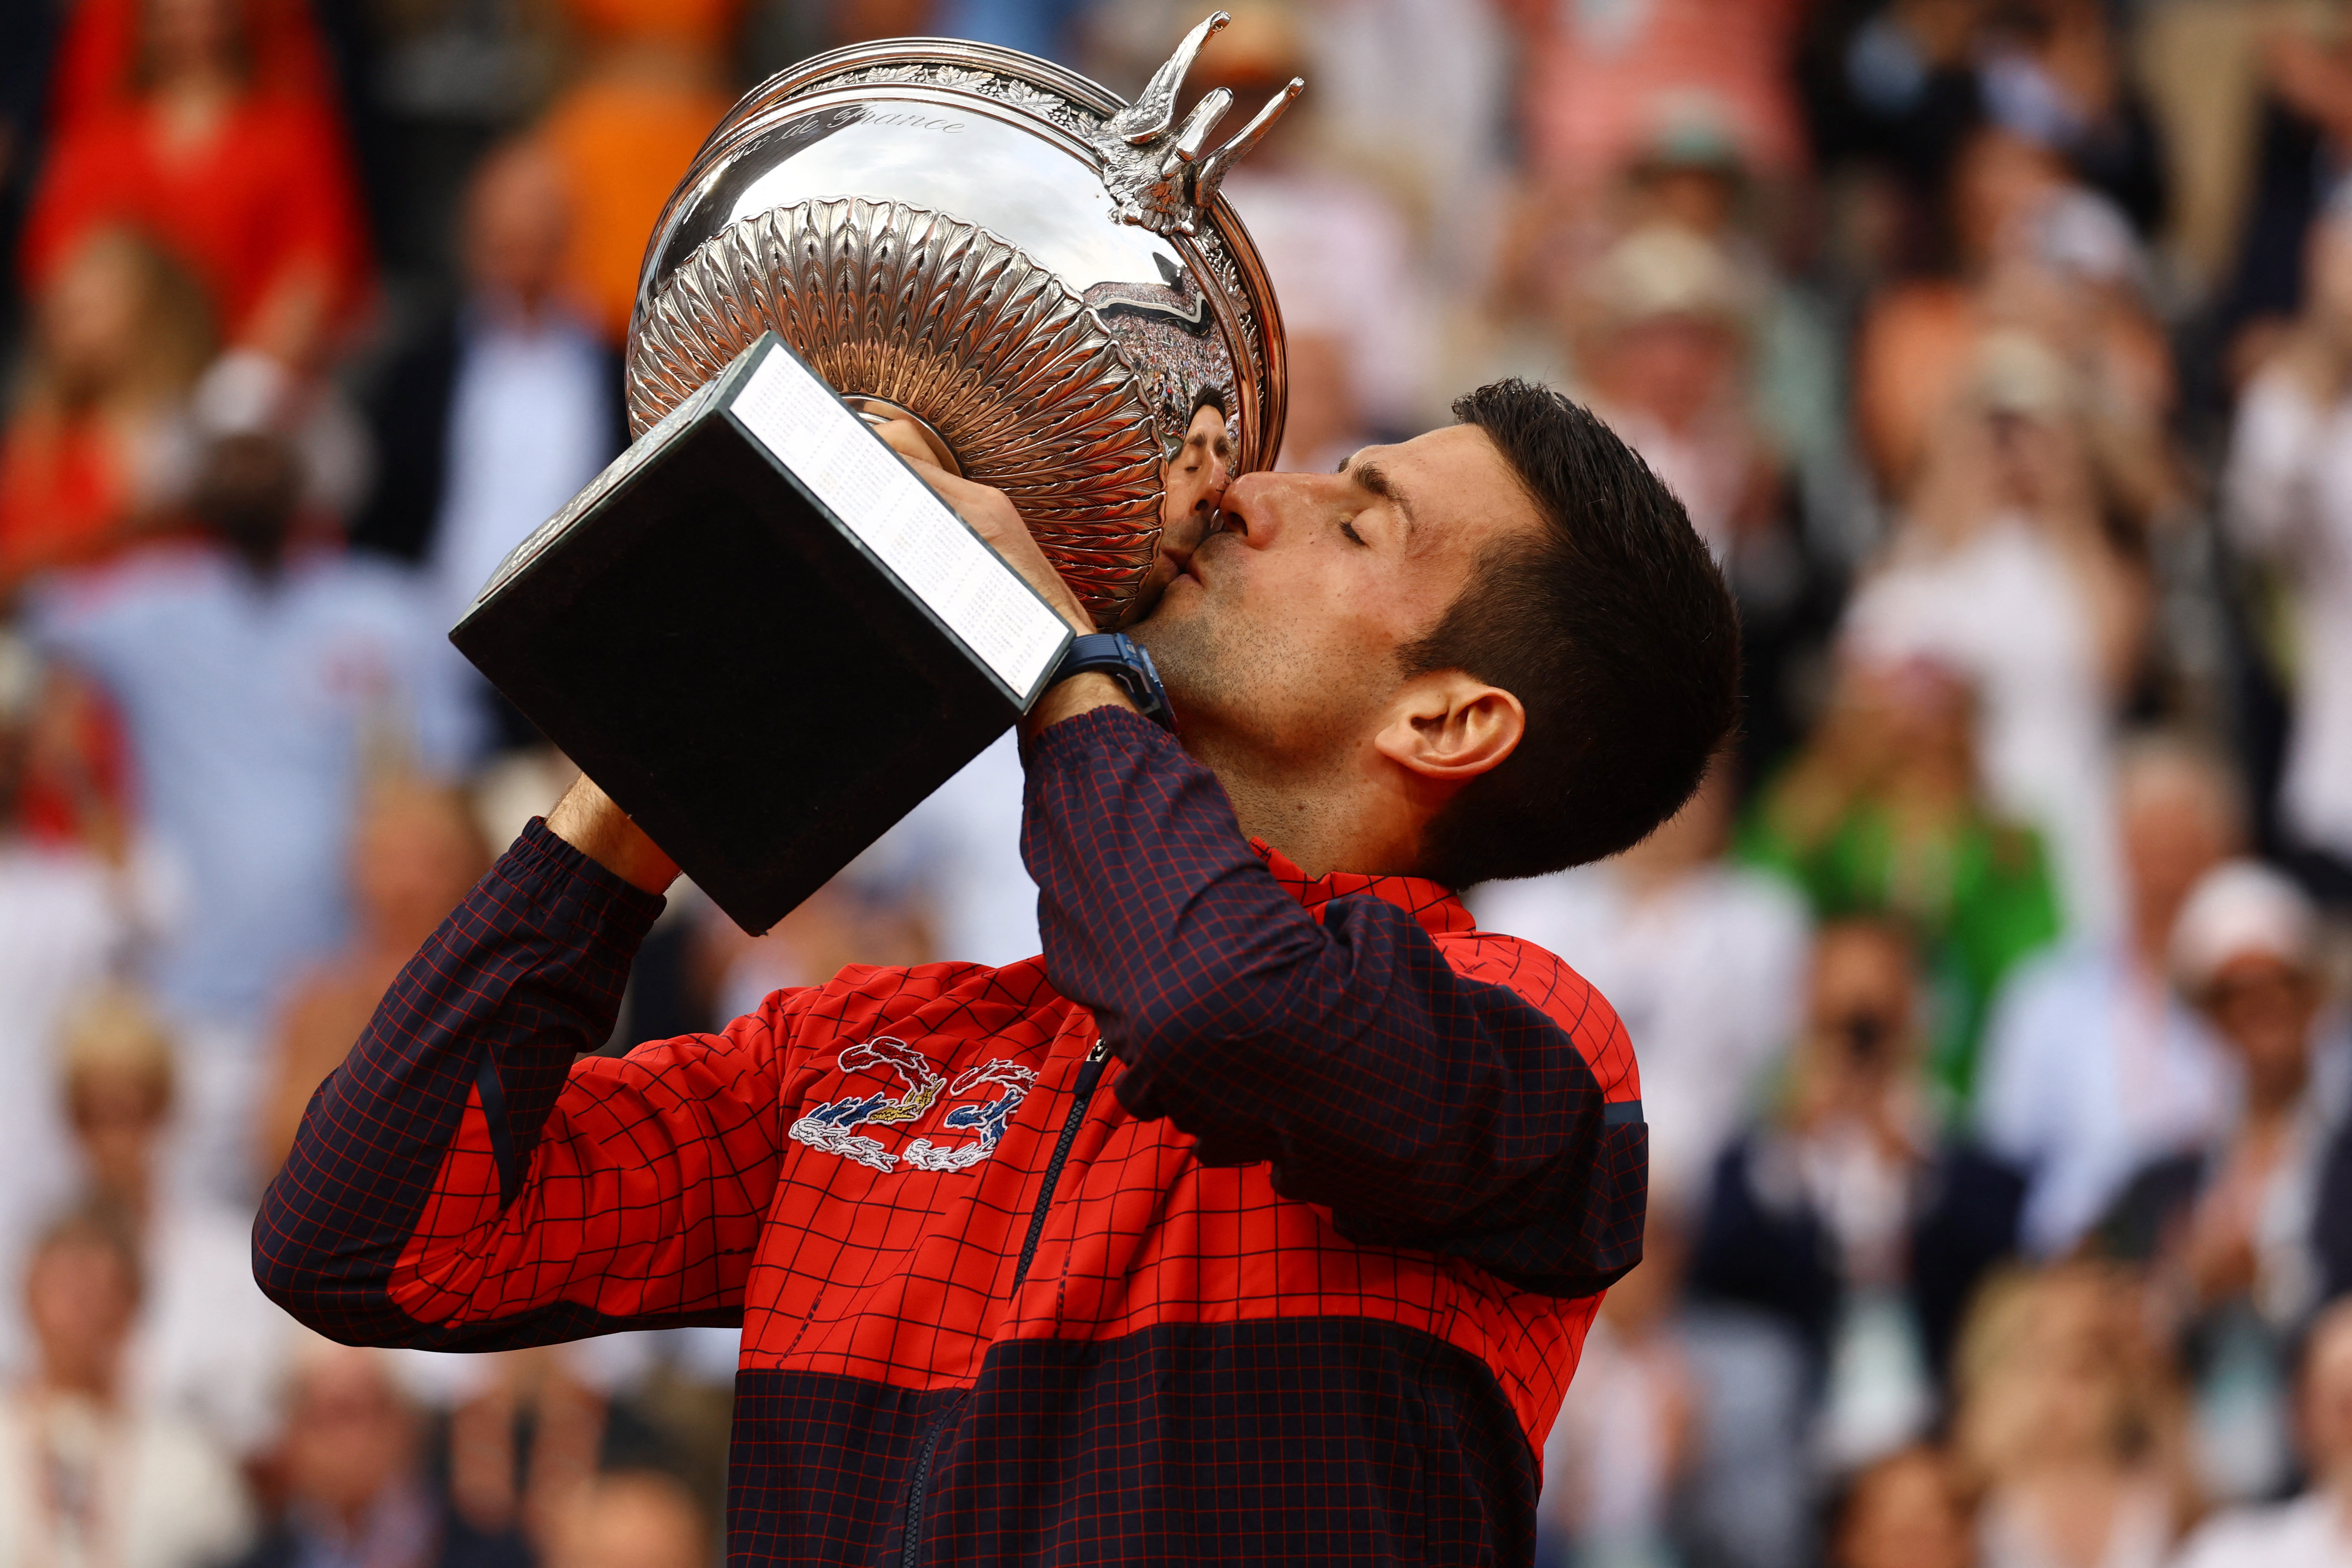 Grand Slam King Djokovic wins 23rd crown by conquering Ruud at French Open